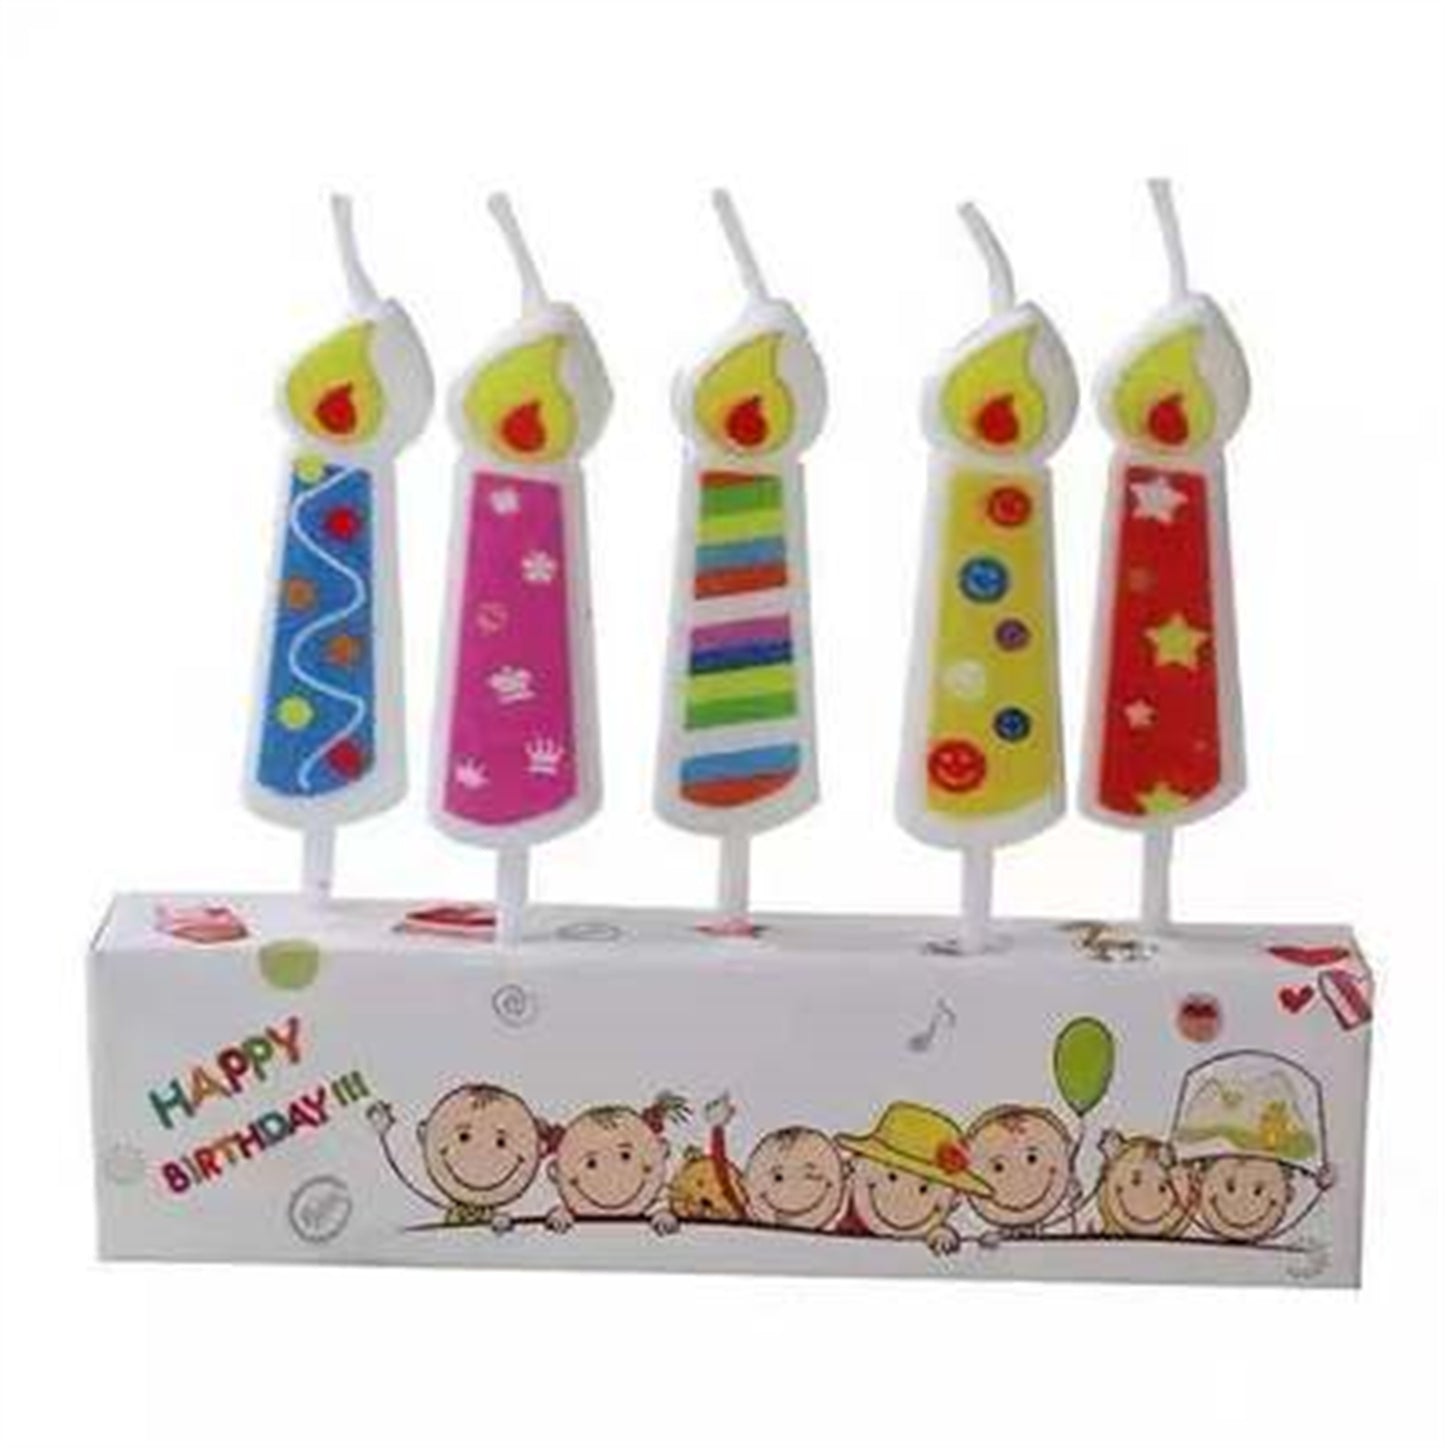 Retro colored print birthday candles, 5 coated colored candles